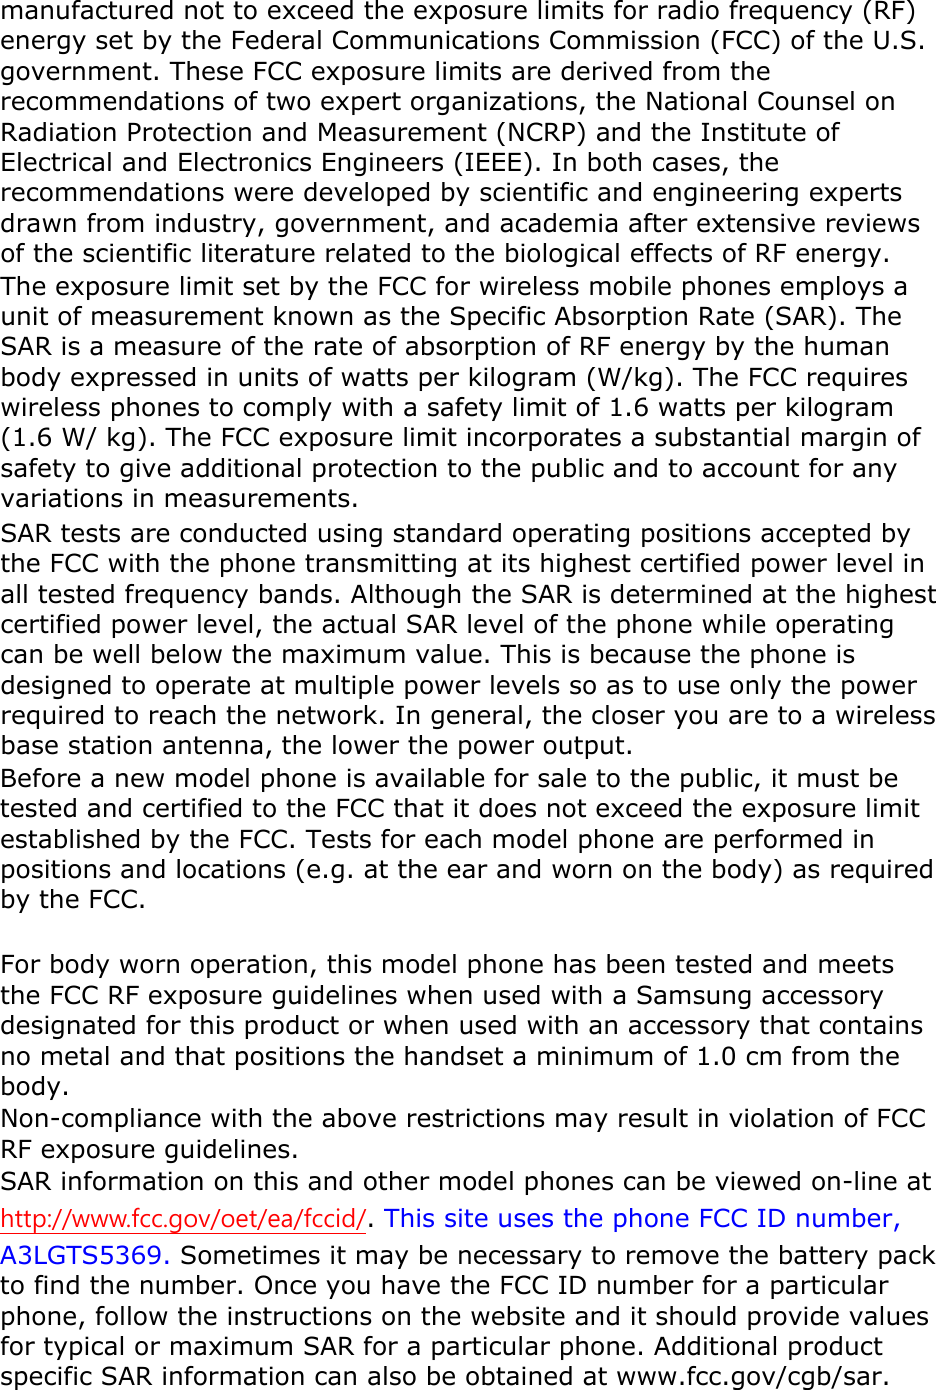 manufactured not to exceed the exposure limits for radio frequency (RF) energy set by the Federal Communications Commission (FCC) of the U.S. government. These FCC exposure limits are derived from the recommendations of two expert organizations, the National Counsel on Radiation Protection and Measurement (NCRP) and the Institute of Electrical and Electronics Engineers (IEEE). In both cases, the recommendations were developed by scientific and engineering experts drawn from industry, government, and academia after extensive reviews of the scientific literature related to the biological effects of RF energy.The exposure limit set by the FCC for wireless mobile phones employs a unit of measurement known as the Specific Absorption Rate (SAR). The SAR is a measure of the rate of absorption of RF energy by the human body expressed in units of watts per kilogram (W/kg). The FCC requires wireless phones to comply with a safety limit of 1.6 watts per kilogram (1.6 W/ kg). The FCC exposure limit incorporates a substantial margin of safety to give additional protection to the public and to account for any variations in measurements.SAR tests are conducted using standard operating positions accepted by the FCC with the phone transmitting at its highest certified power level in all tested frequency bands. Although the SAR is determined at the highest certified power level, the actual SAR level of the phone while operating can be well below the maximum value. This is because the phone is designed to operate at multiple power levels so as to use only the power required to reach the network. In general, the closer you are to a wireless base station antenna, the lower the power output. Before a new model phone is available for sale to the public, it must be tested and certified to the FCC that it does not exceed the exposure limit established by the FCC. Tests for each model phone are performed in positions and locations (e.g. at the ear and worn on the body) as required by the FCC.     For body worn operation, this model phone has been tested and meets the FCC RF exposure guidelines when used with a Samsung accessory designated for this product or when used with an accessory that contains no metal and that positions the handset a minimum of 1.0 cm from the body.Non-compliance with the above restrictions may result in violation of FCC RF exposure guidelines. SAR information on this and other model phones can be viewed on-line at http://www.fcc.gov/oet/ea/fccid/.This site uses the phone FCC ID number, A3LGTS5369. Sometimes it may be necessary to remove the battery pack to find the number. Once you have the FCC ID number for a particular phone, follow the instructions on the website and it should provide values for typical or maximum SAR for a particular phone. Additional product specific SAR information can also be obtained at www.fcc.gov/cgb/sar. 